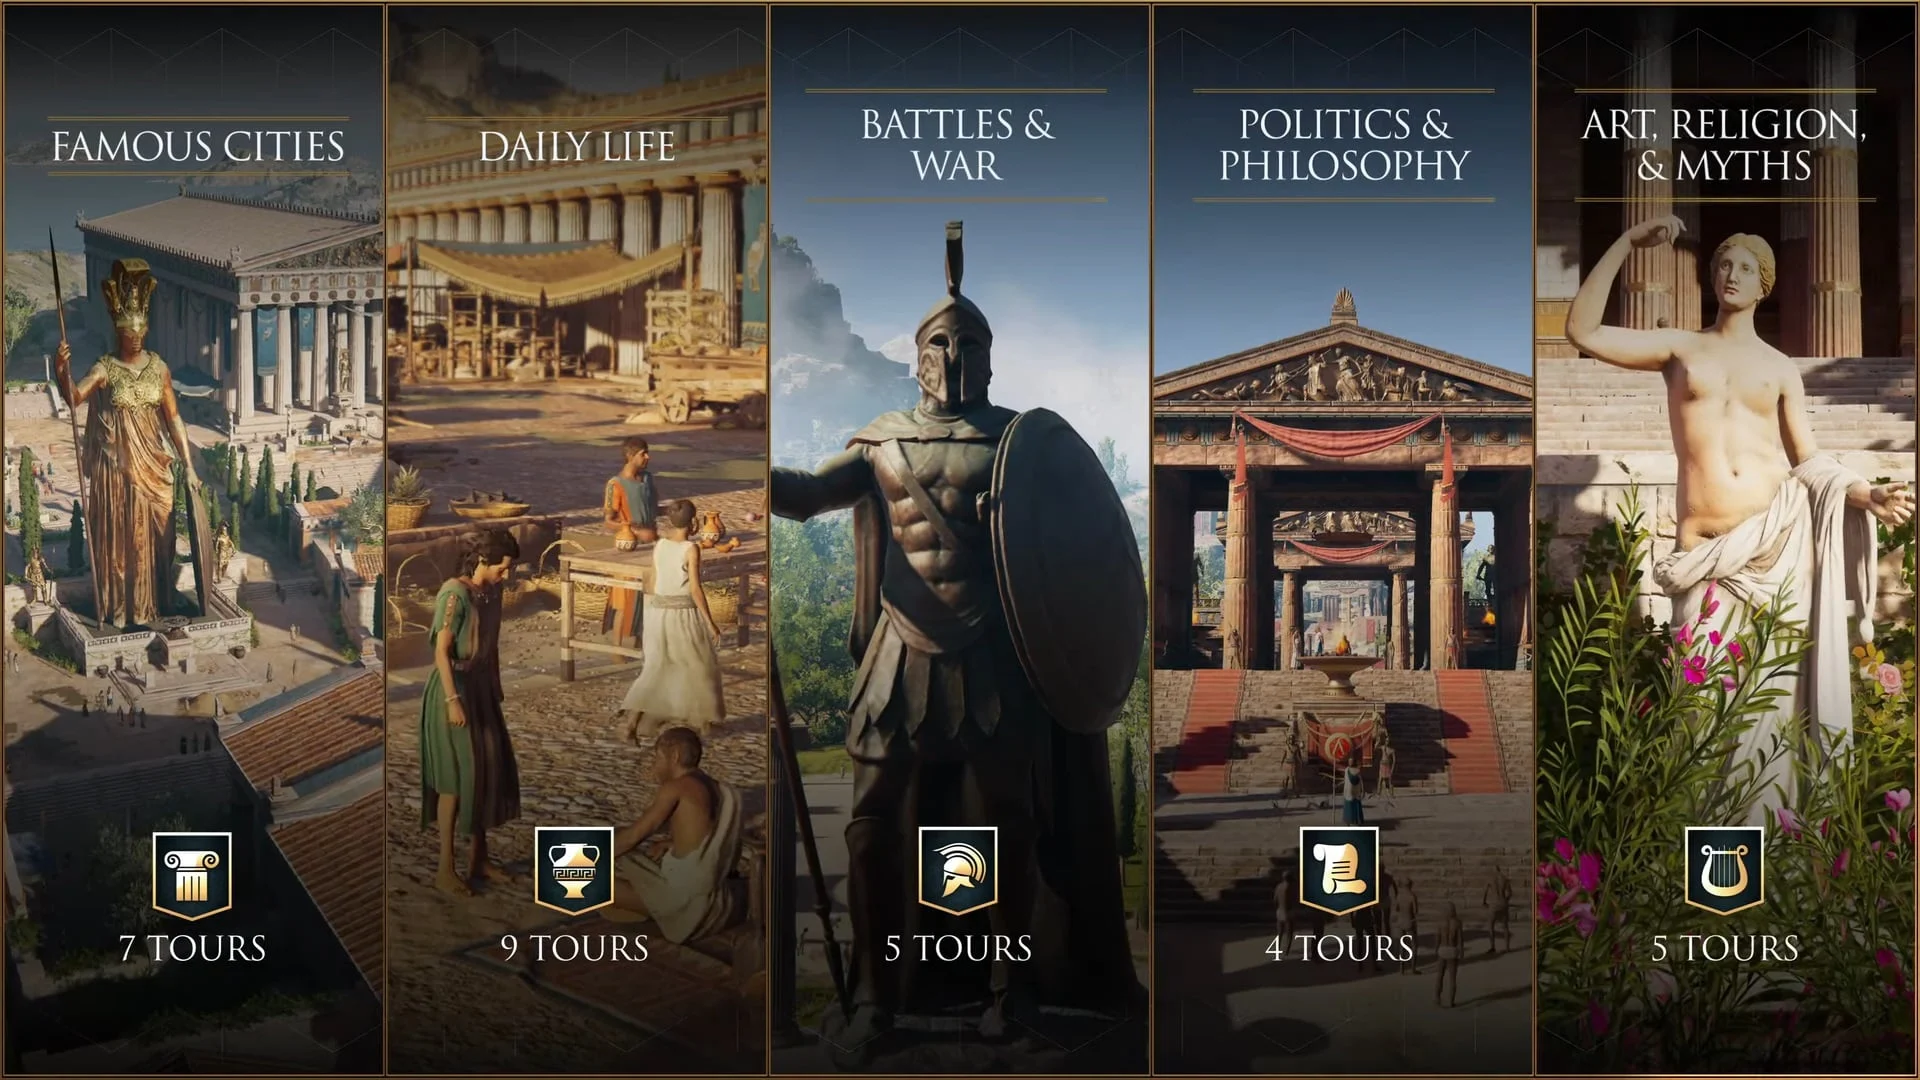 Image that shows the 5 categories and how many tours were released in 2019. Famous cities, Daily Life, Battles & War, Politics and Philosophy, Art Religion & Myths